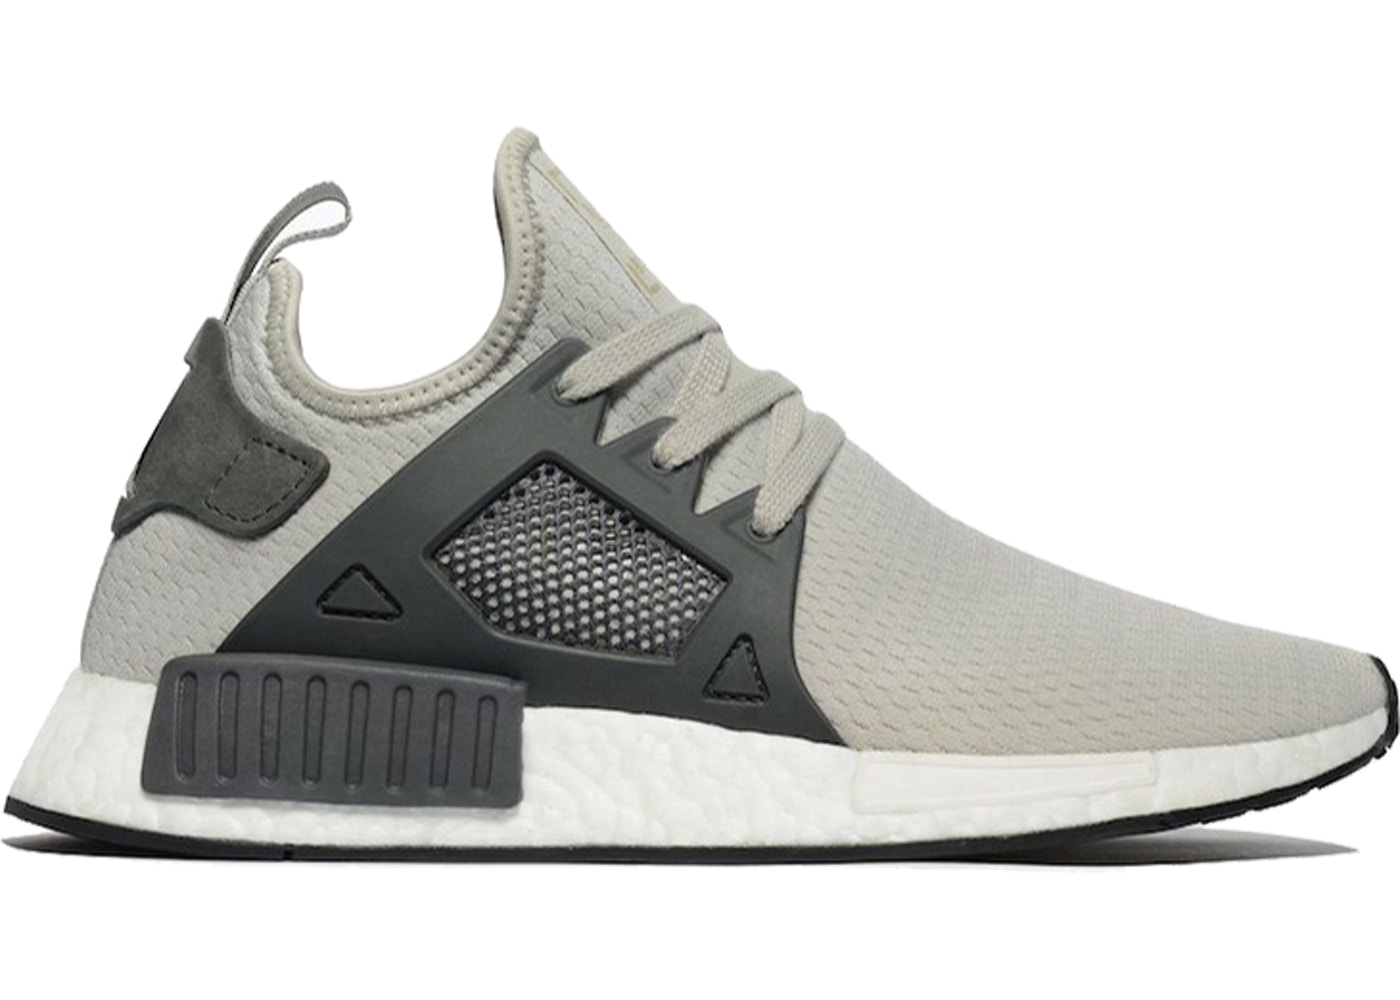 nmd xr1 exclusive